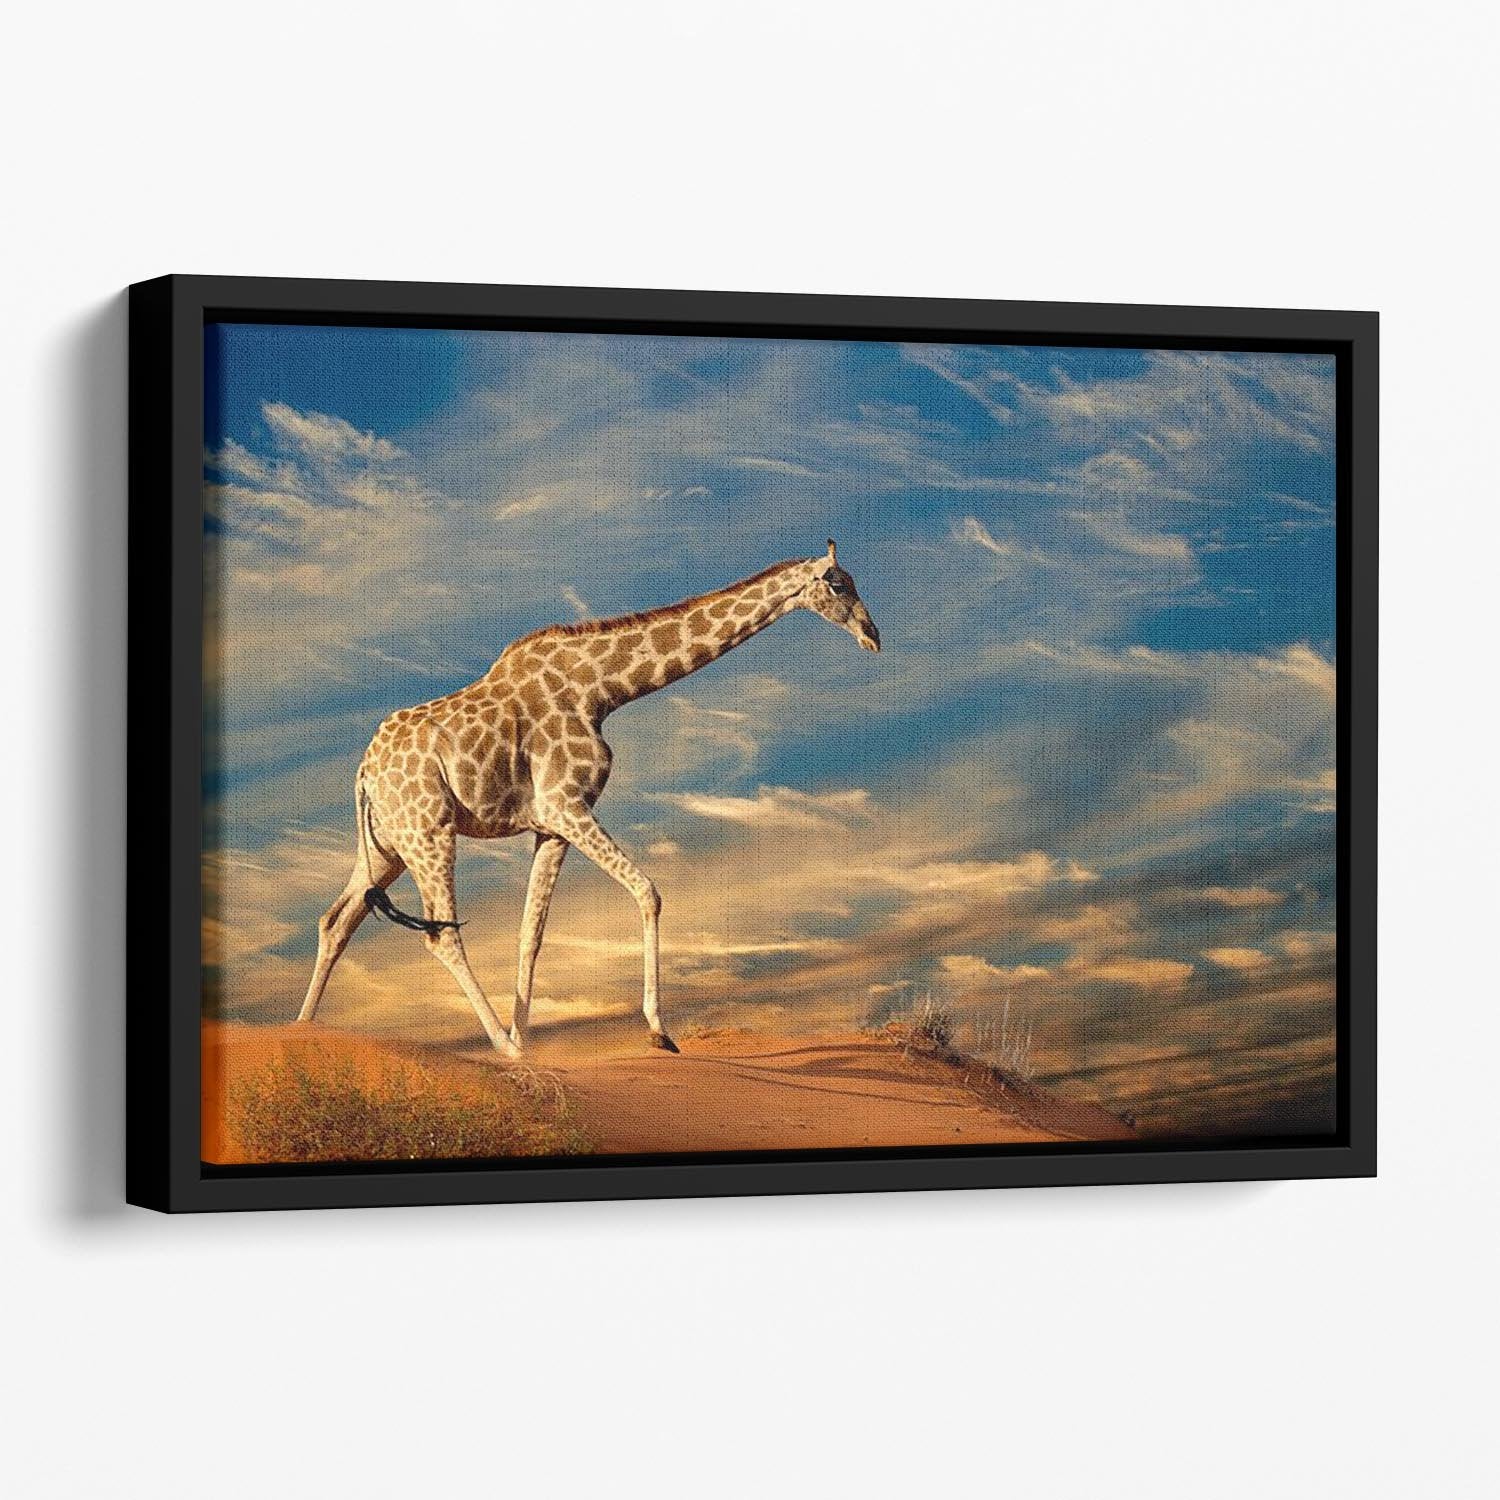 Giraffe walking on a sand dune with clouds South Africa Floating Framed Canvas - Canvas Art Rocks - 1